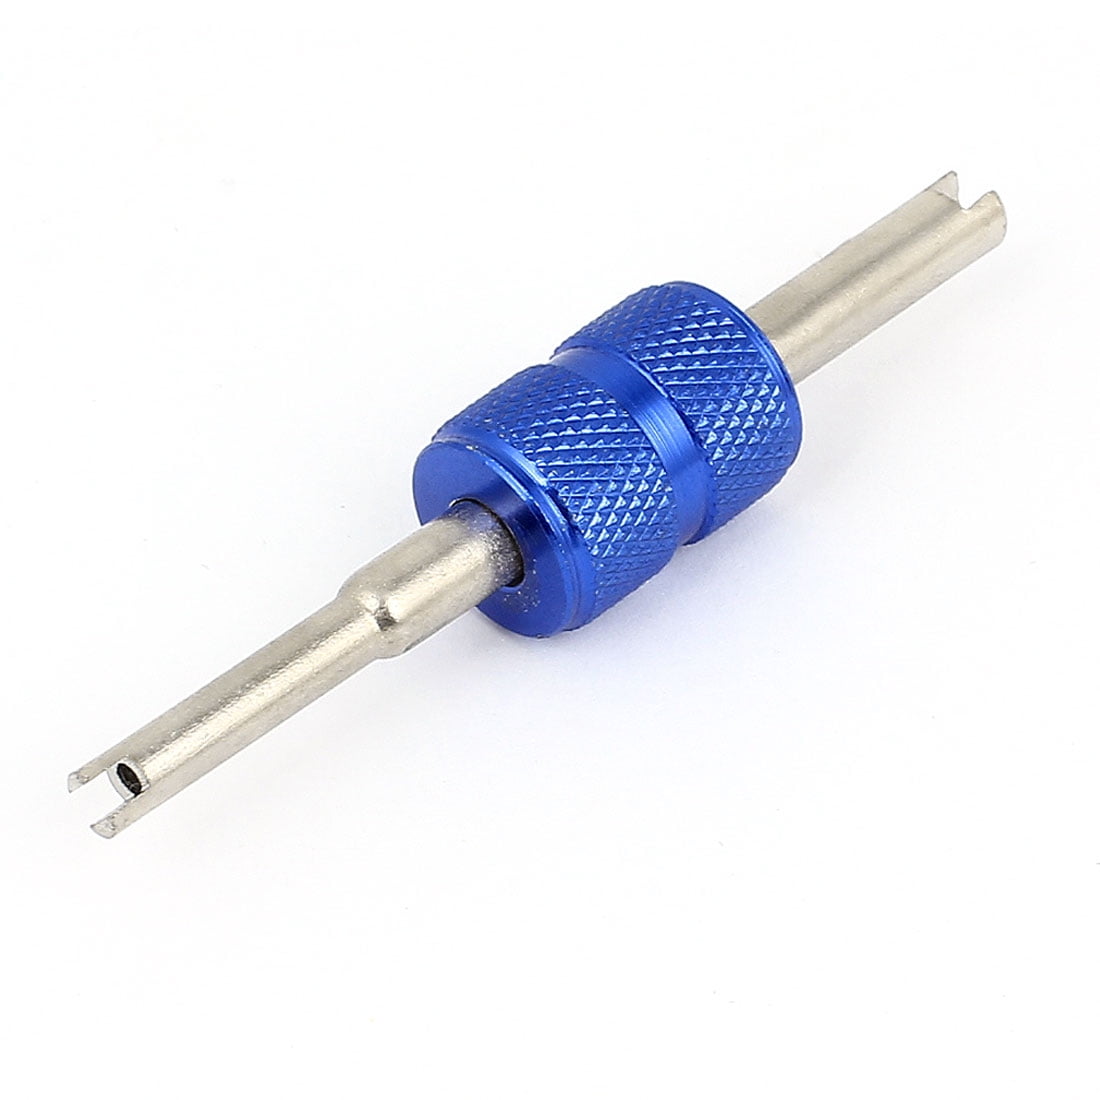 2 Ways Car Truck SUV Tyre Tire Valve Stem Core Remover Puller Screwdriver Tool